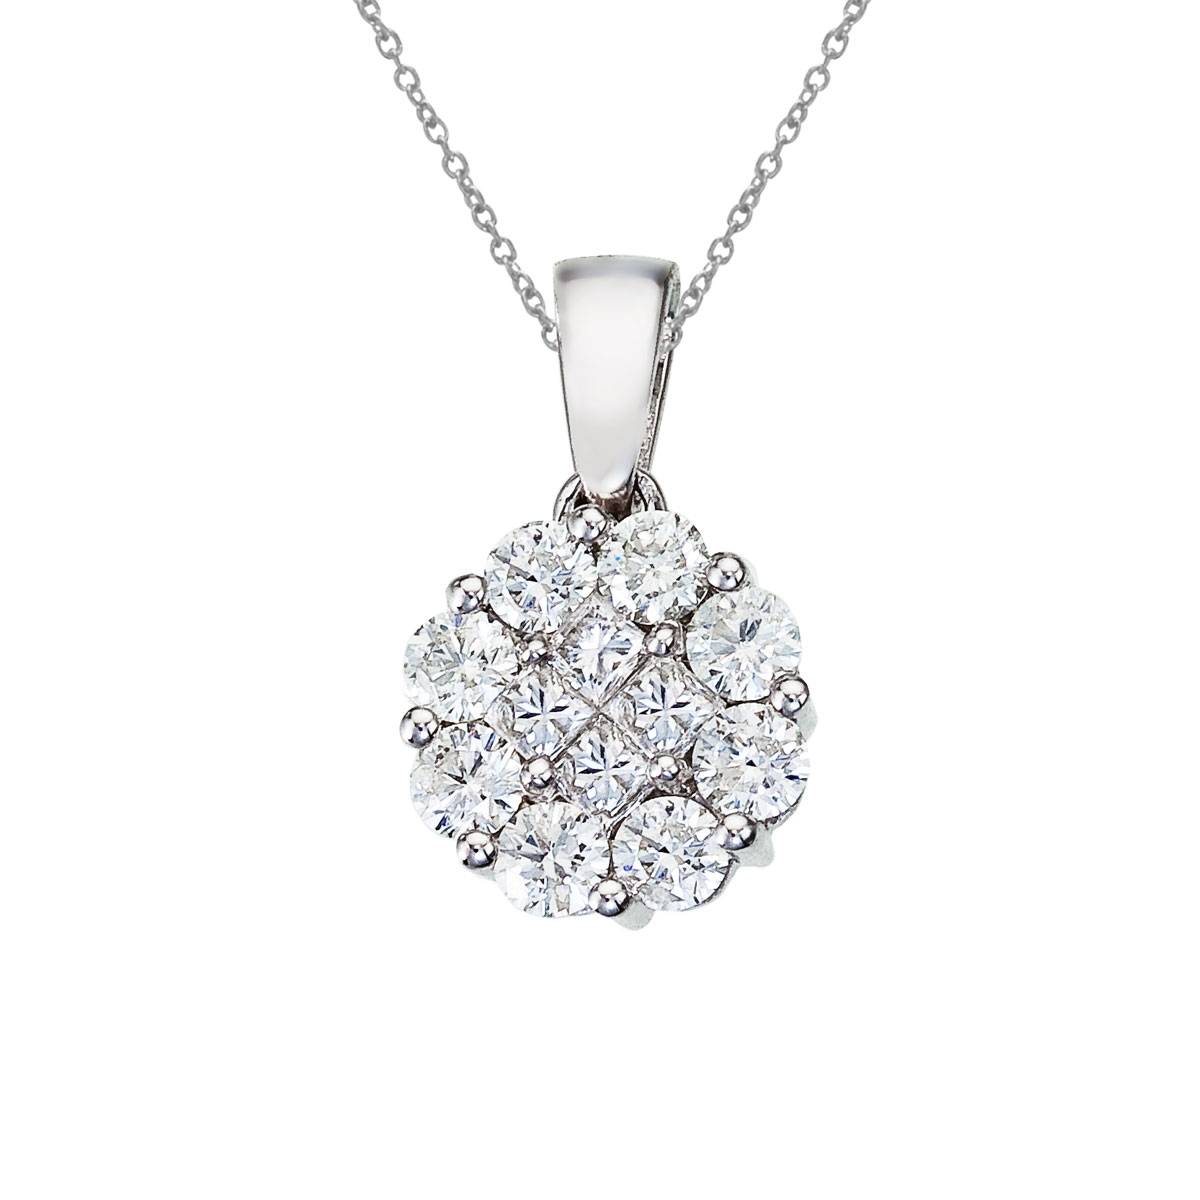 14k white gold Clustaire diamond pendant with a full carat of shimmering diamonds. Clustaires give the look of a traditional solitaire at a fraction of the cost.